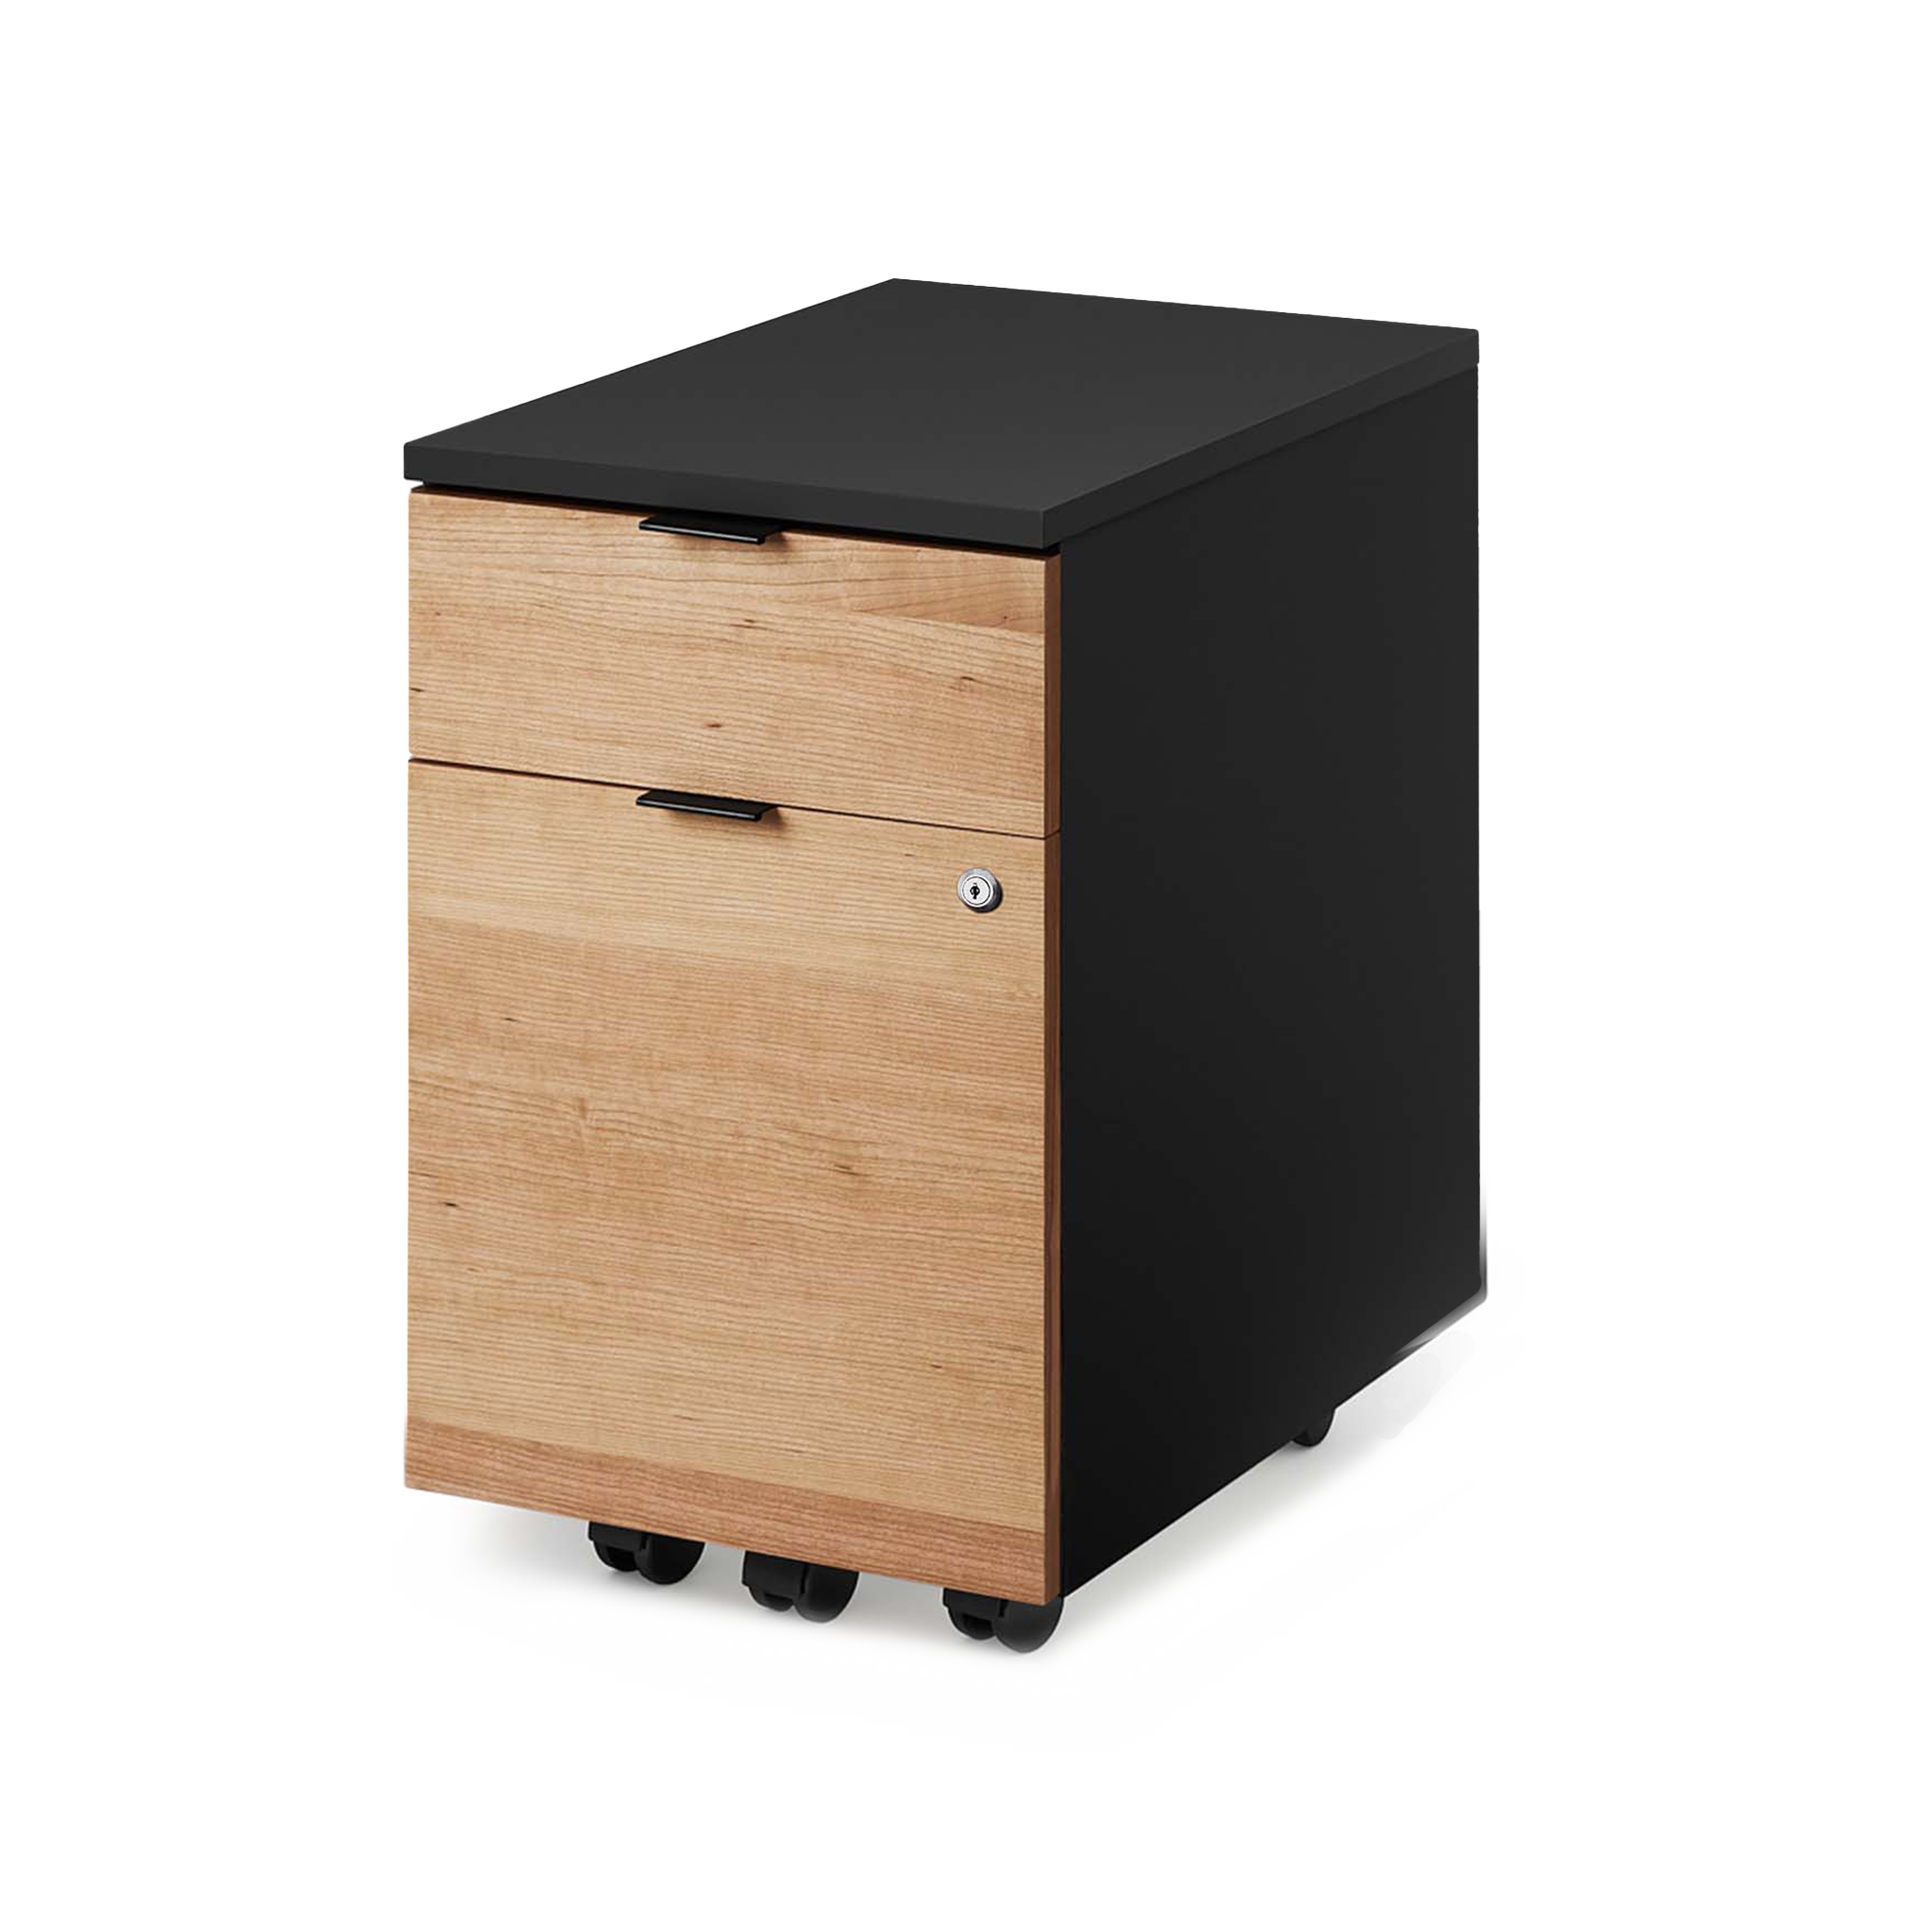 Almost Perfect Neat filing cabinet - ergonofis